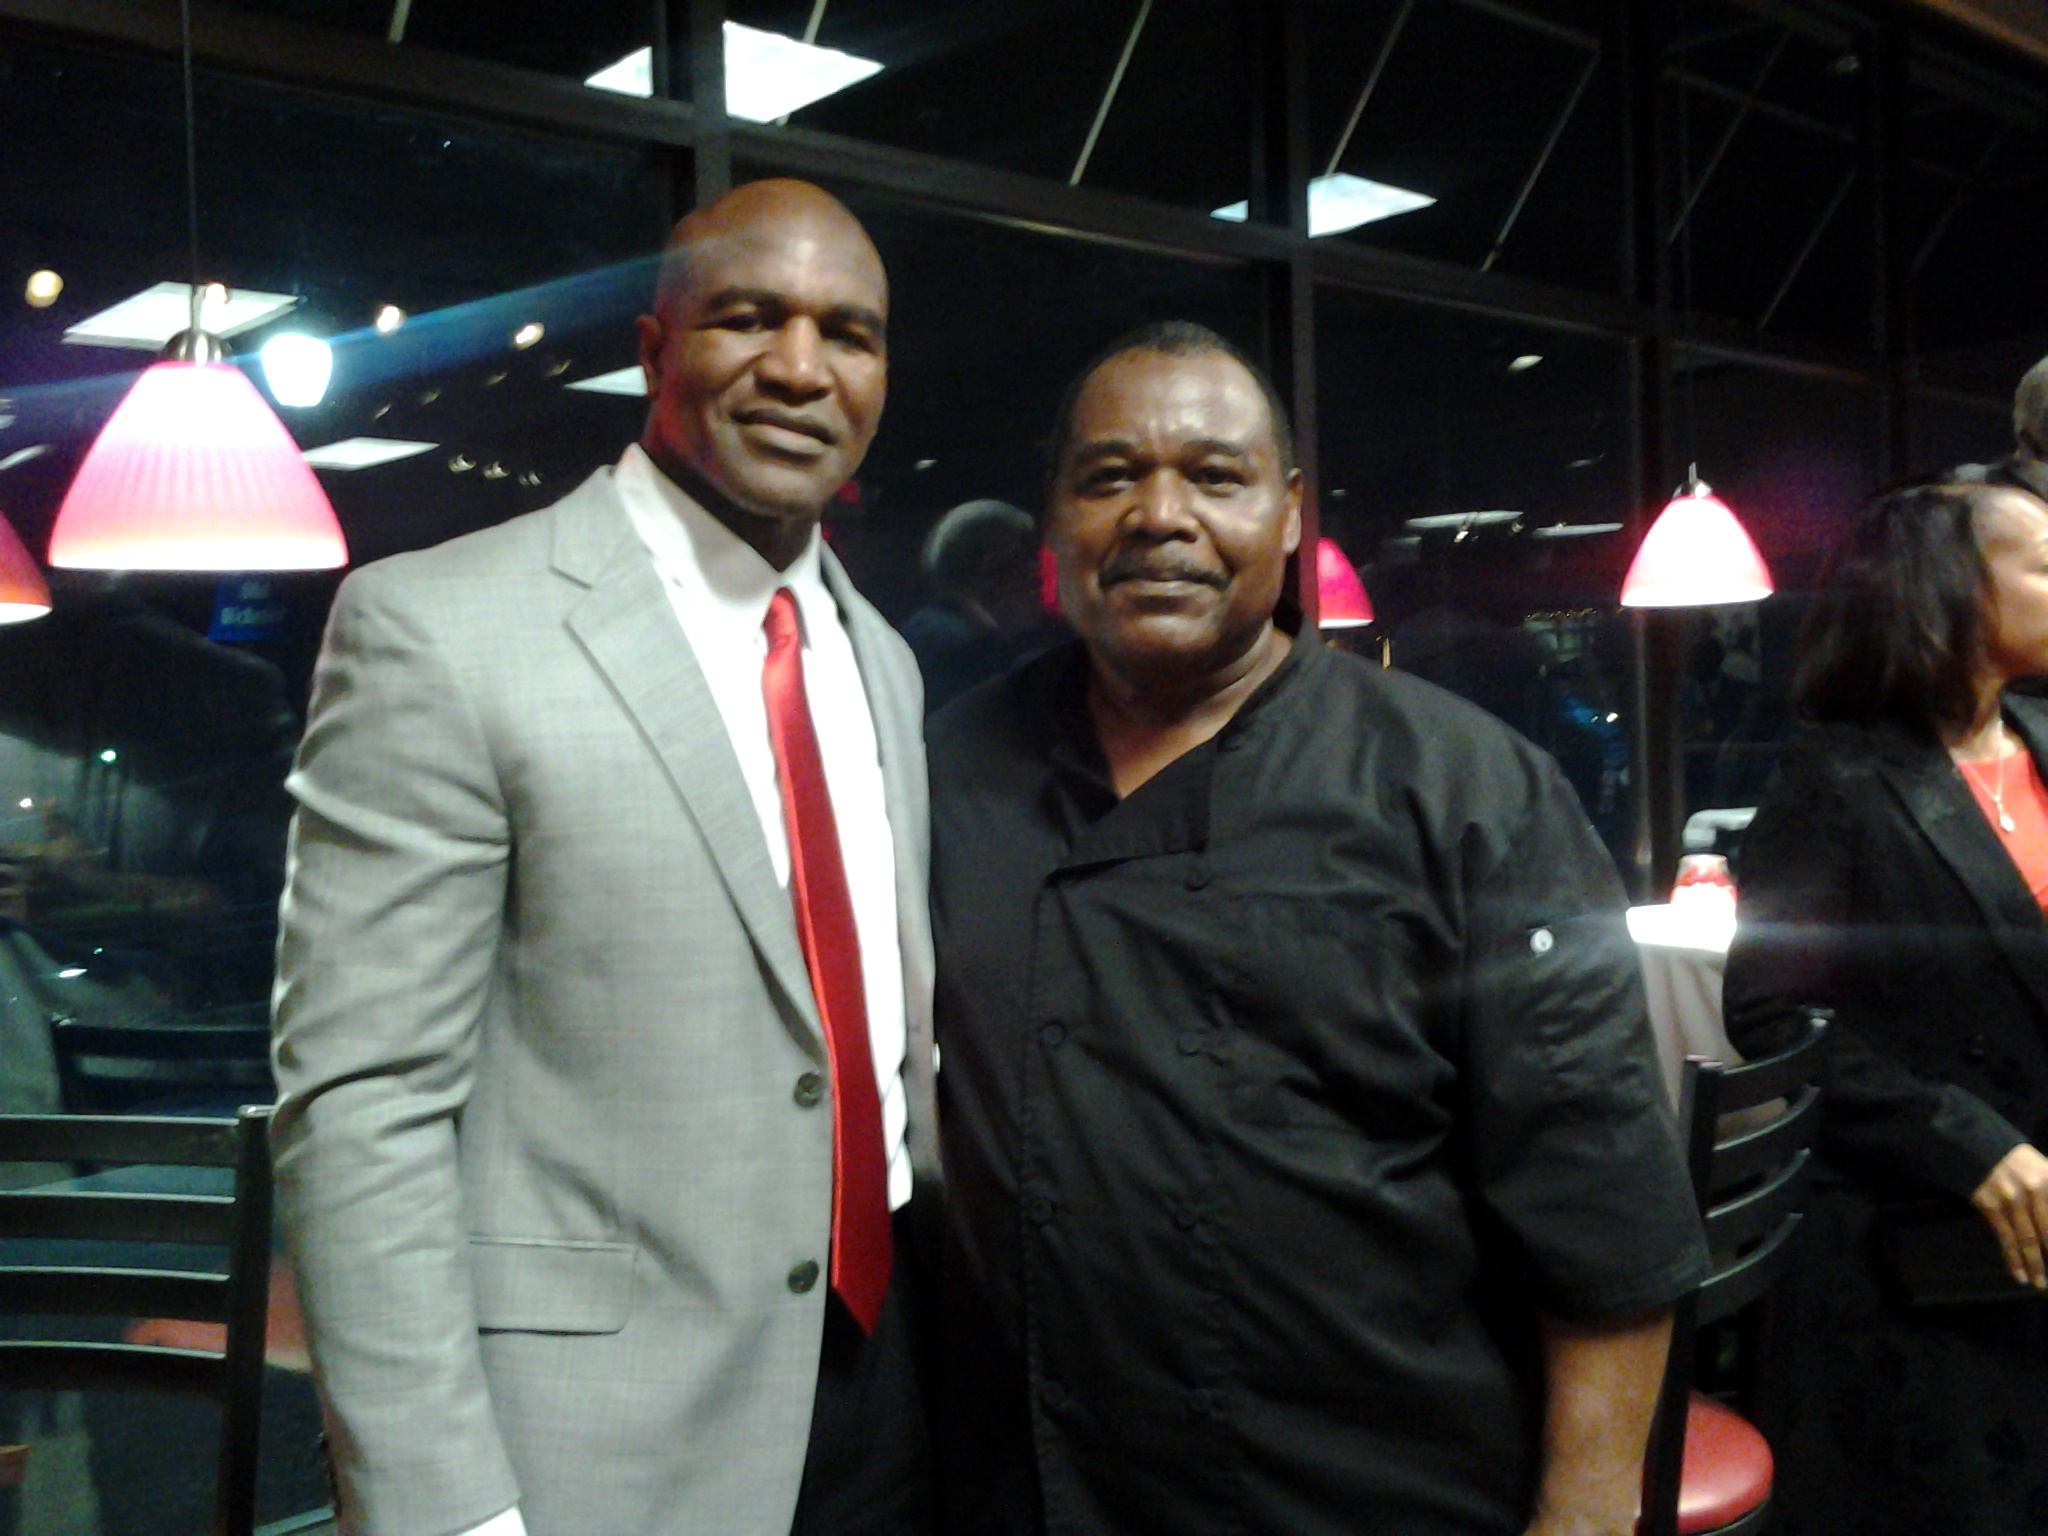 Former Heavyweight Boxing Champion Evander Holyfield with Ms. Piggies' co-founder